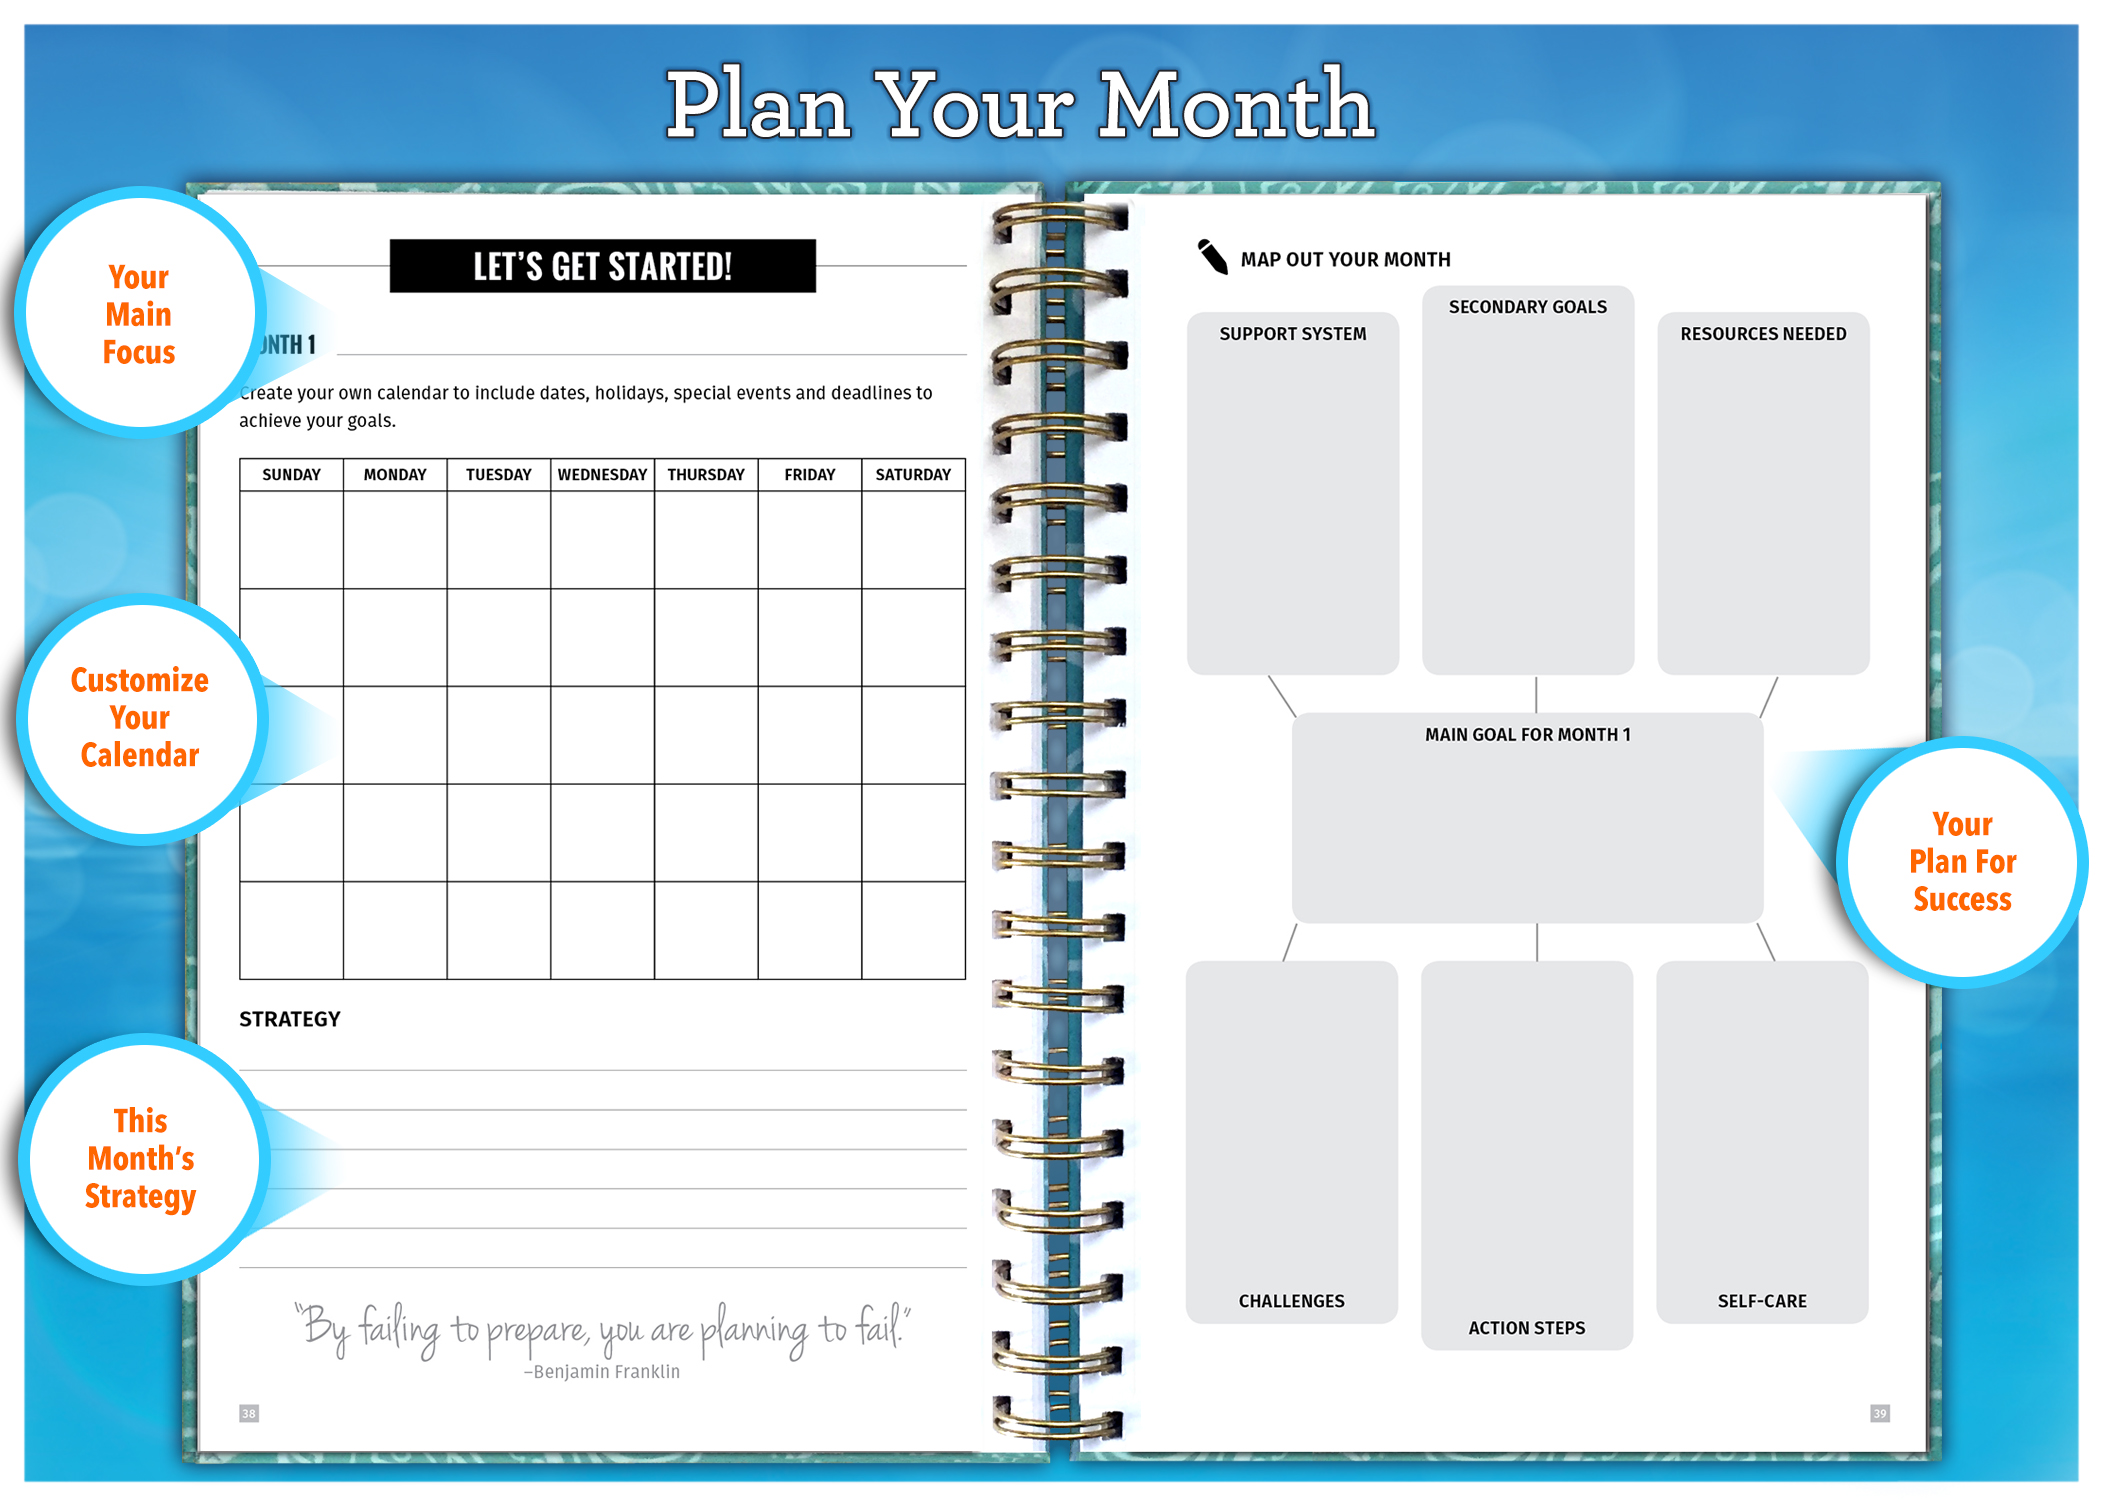 With motivation and inspiration against tension and e | Life Coach weekly planner for appointments and life guide KLARHEIT ® Notebook with calendar en inglés Calendar The A5-organizer for more structure and focus in your everyday life 